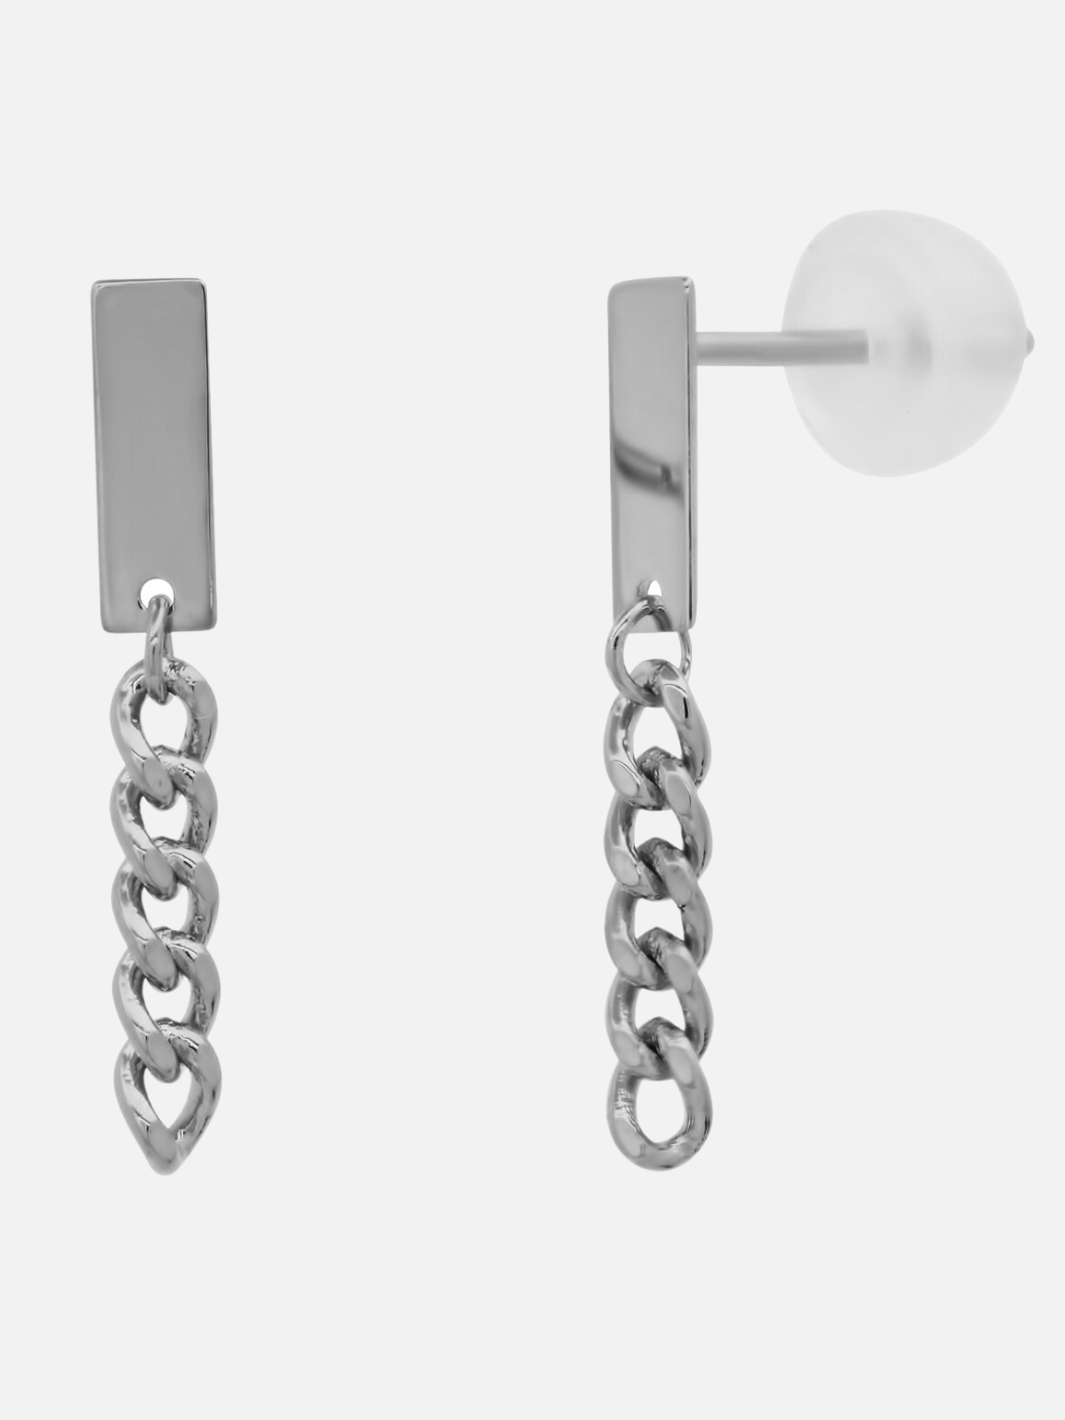 BAR POST CURB CHAIN LINEAR EARRINGS IN SILVER OX - Romi Boutique